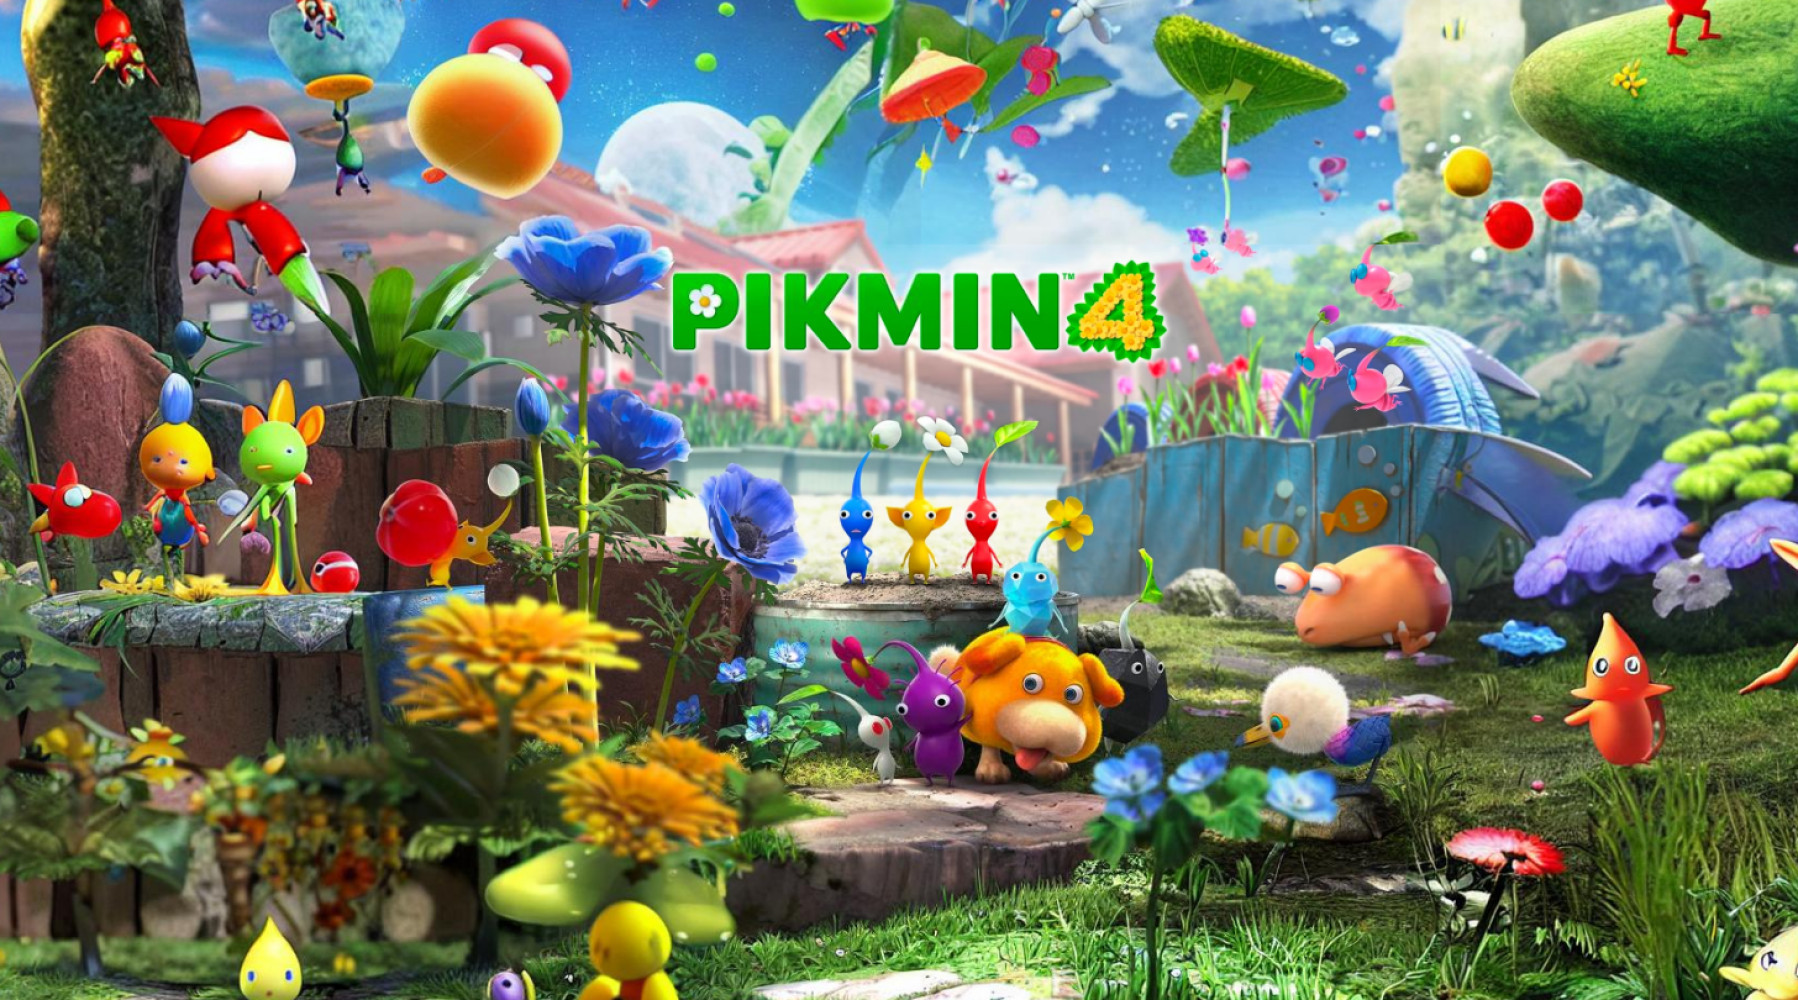 A new trailer for Pikmin 4 has been released, in which we are told about the features of different types of pikmin